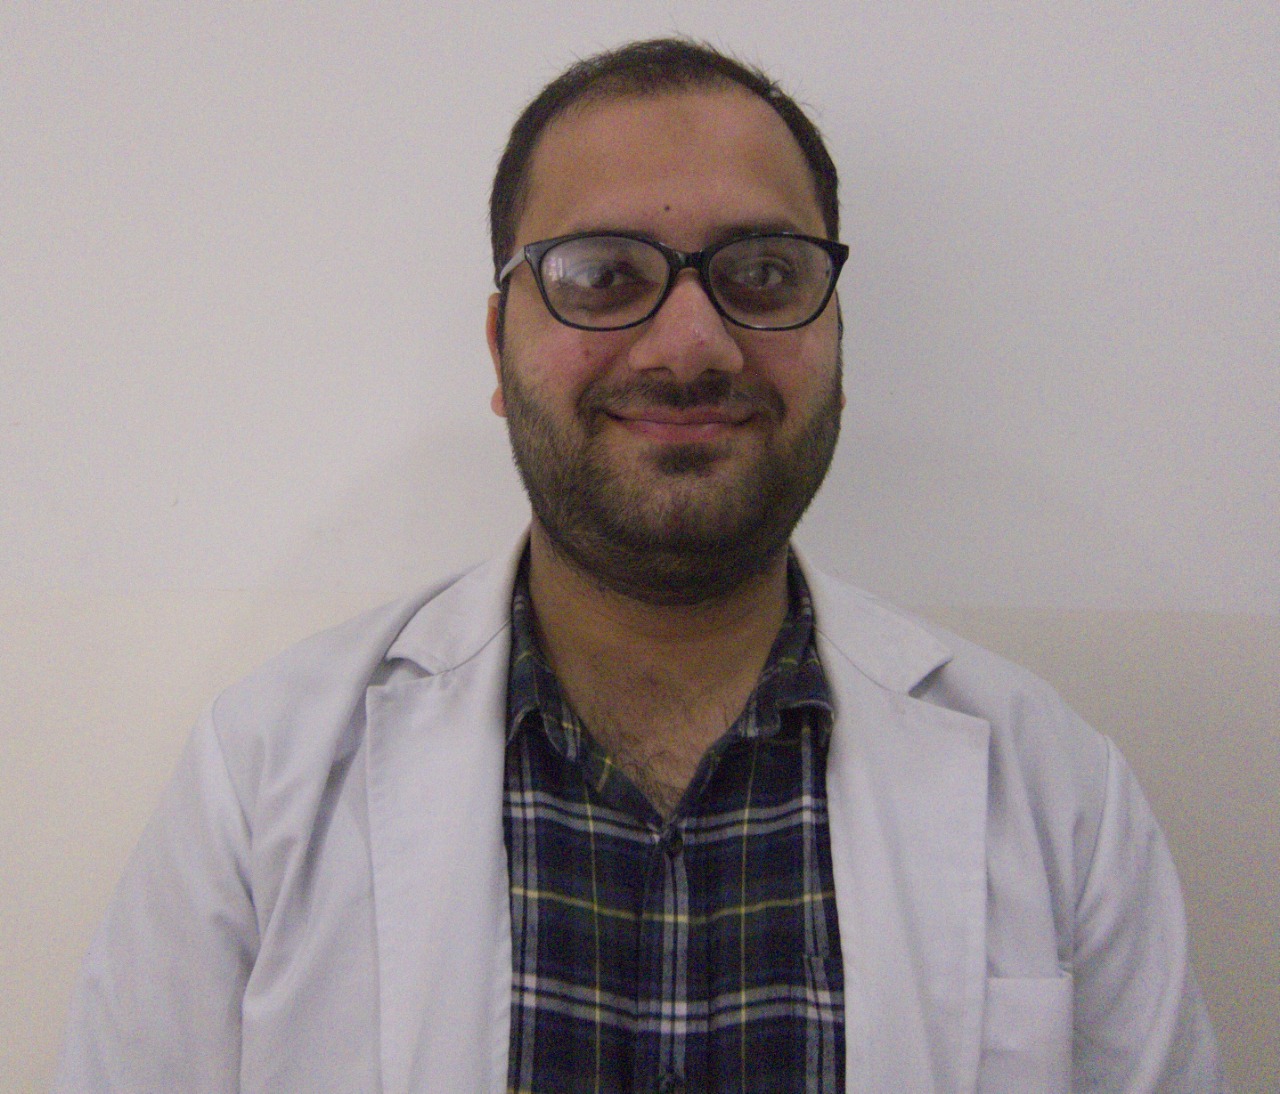 Dr. Mohammed Ziauddin Sheeraz-ENT Surgeon in Hyderabad